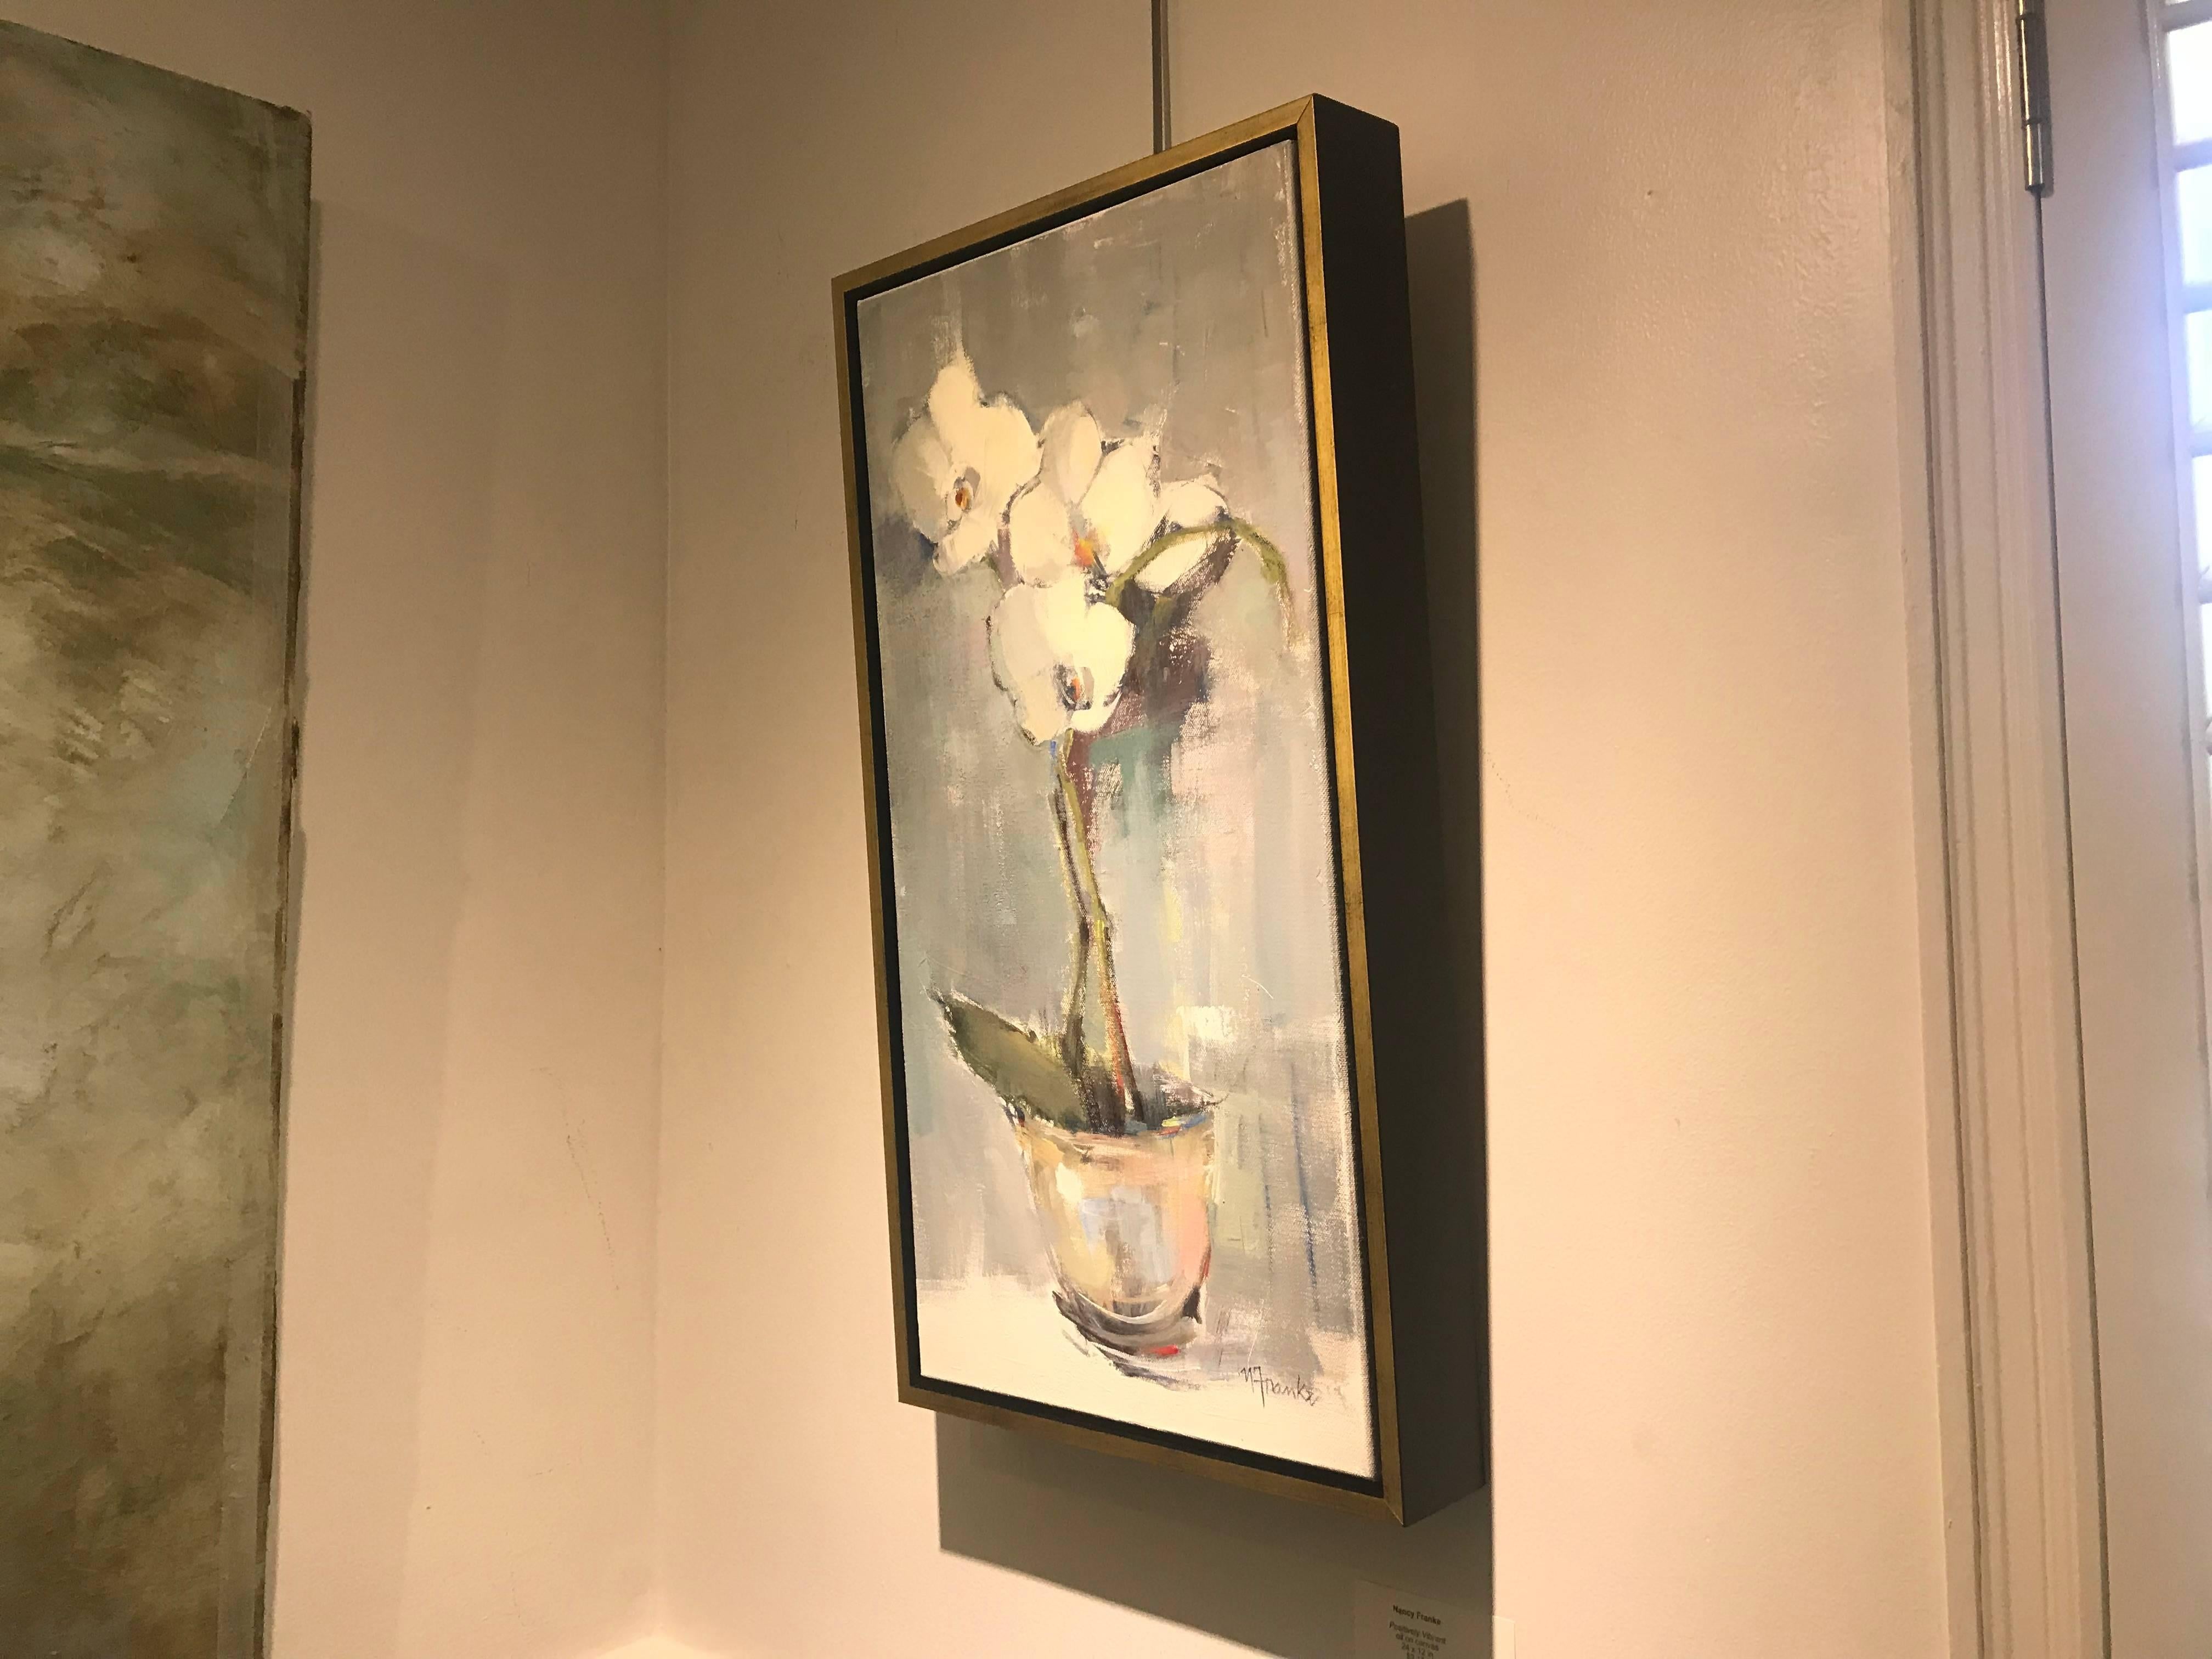 'Positively Vibrant' is an Impressionist oil on canvas floral painting of vertical format, created by American artist Nancy Franke in 2018. This still-life painting depicts a graceful bouquet of white orchids placed in front of a light green